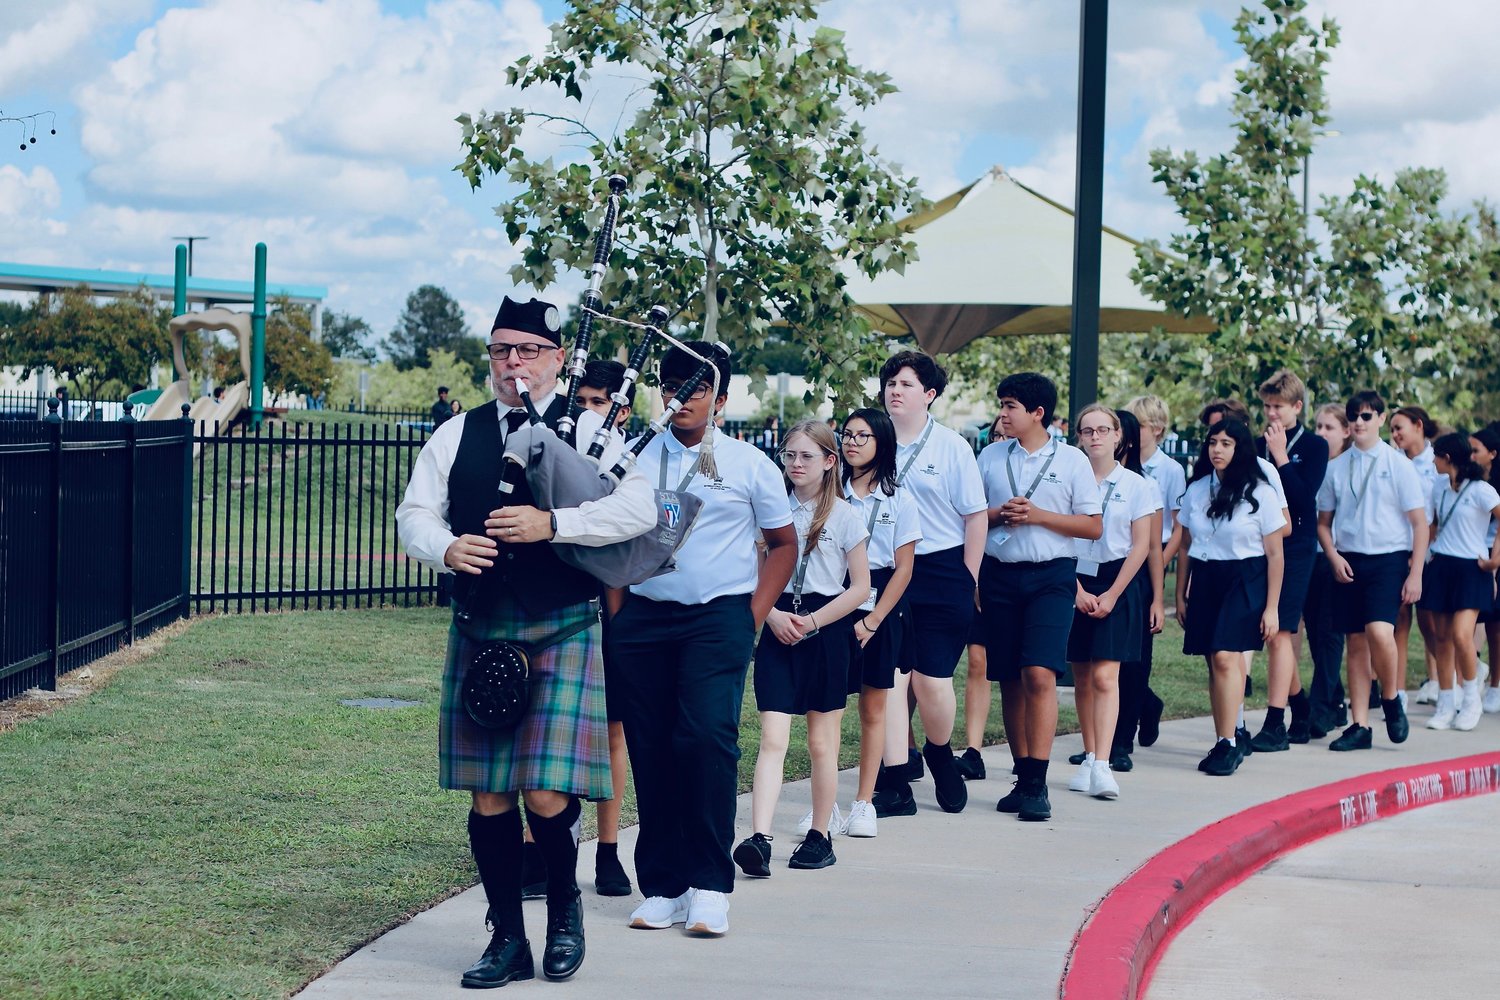 A bagpiper leads a group of students at the British International School of Houston, 2203 N. Westgreen Blvd., to an on-campus commemorative thanksgiving event honoring the life of Queen Elizabeth II of the United Kingdom. Events included a special assembly and a tree-planting ceremony where students and staff laid down flowers in the queen’s memory. The queen’s funeral was held Monday in London.